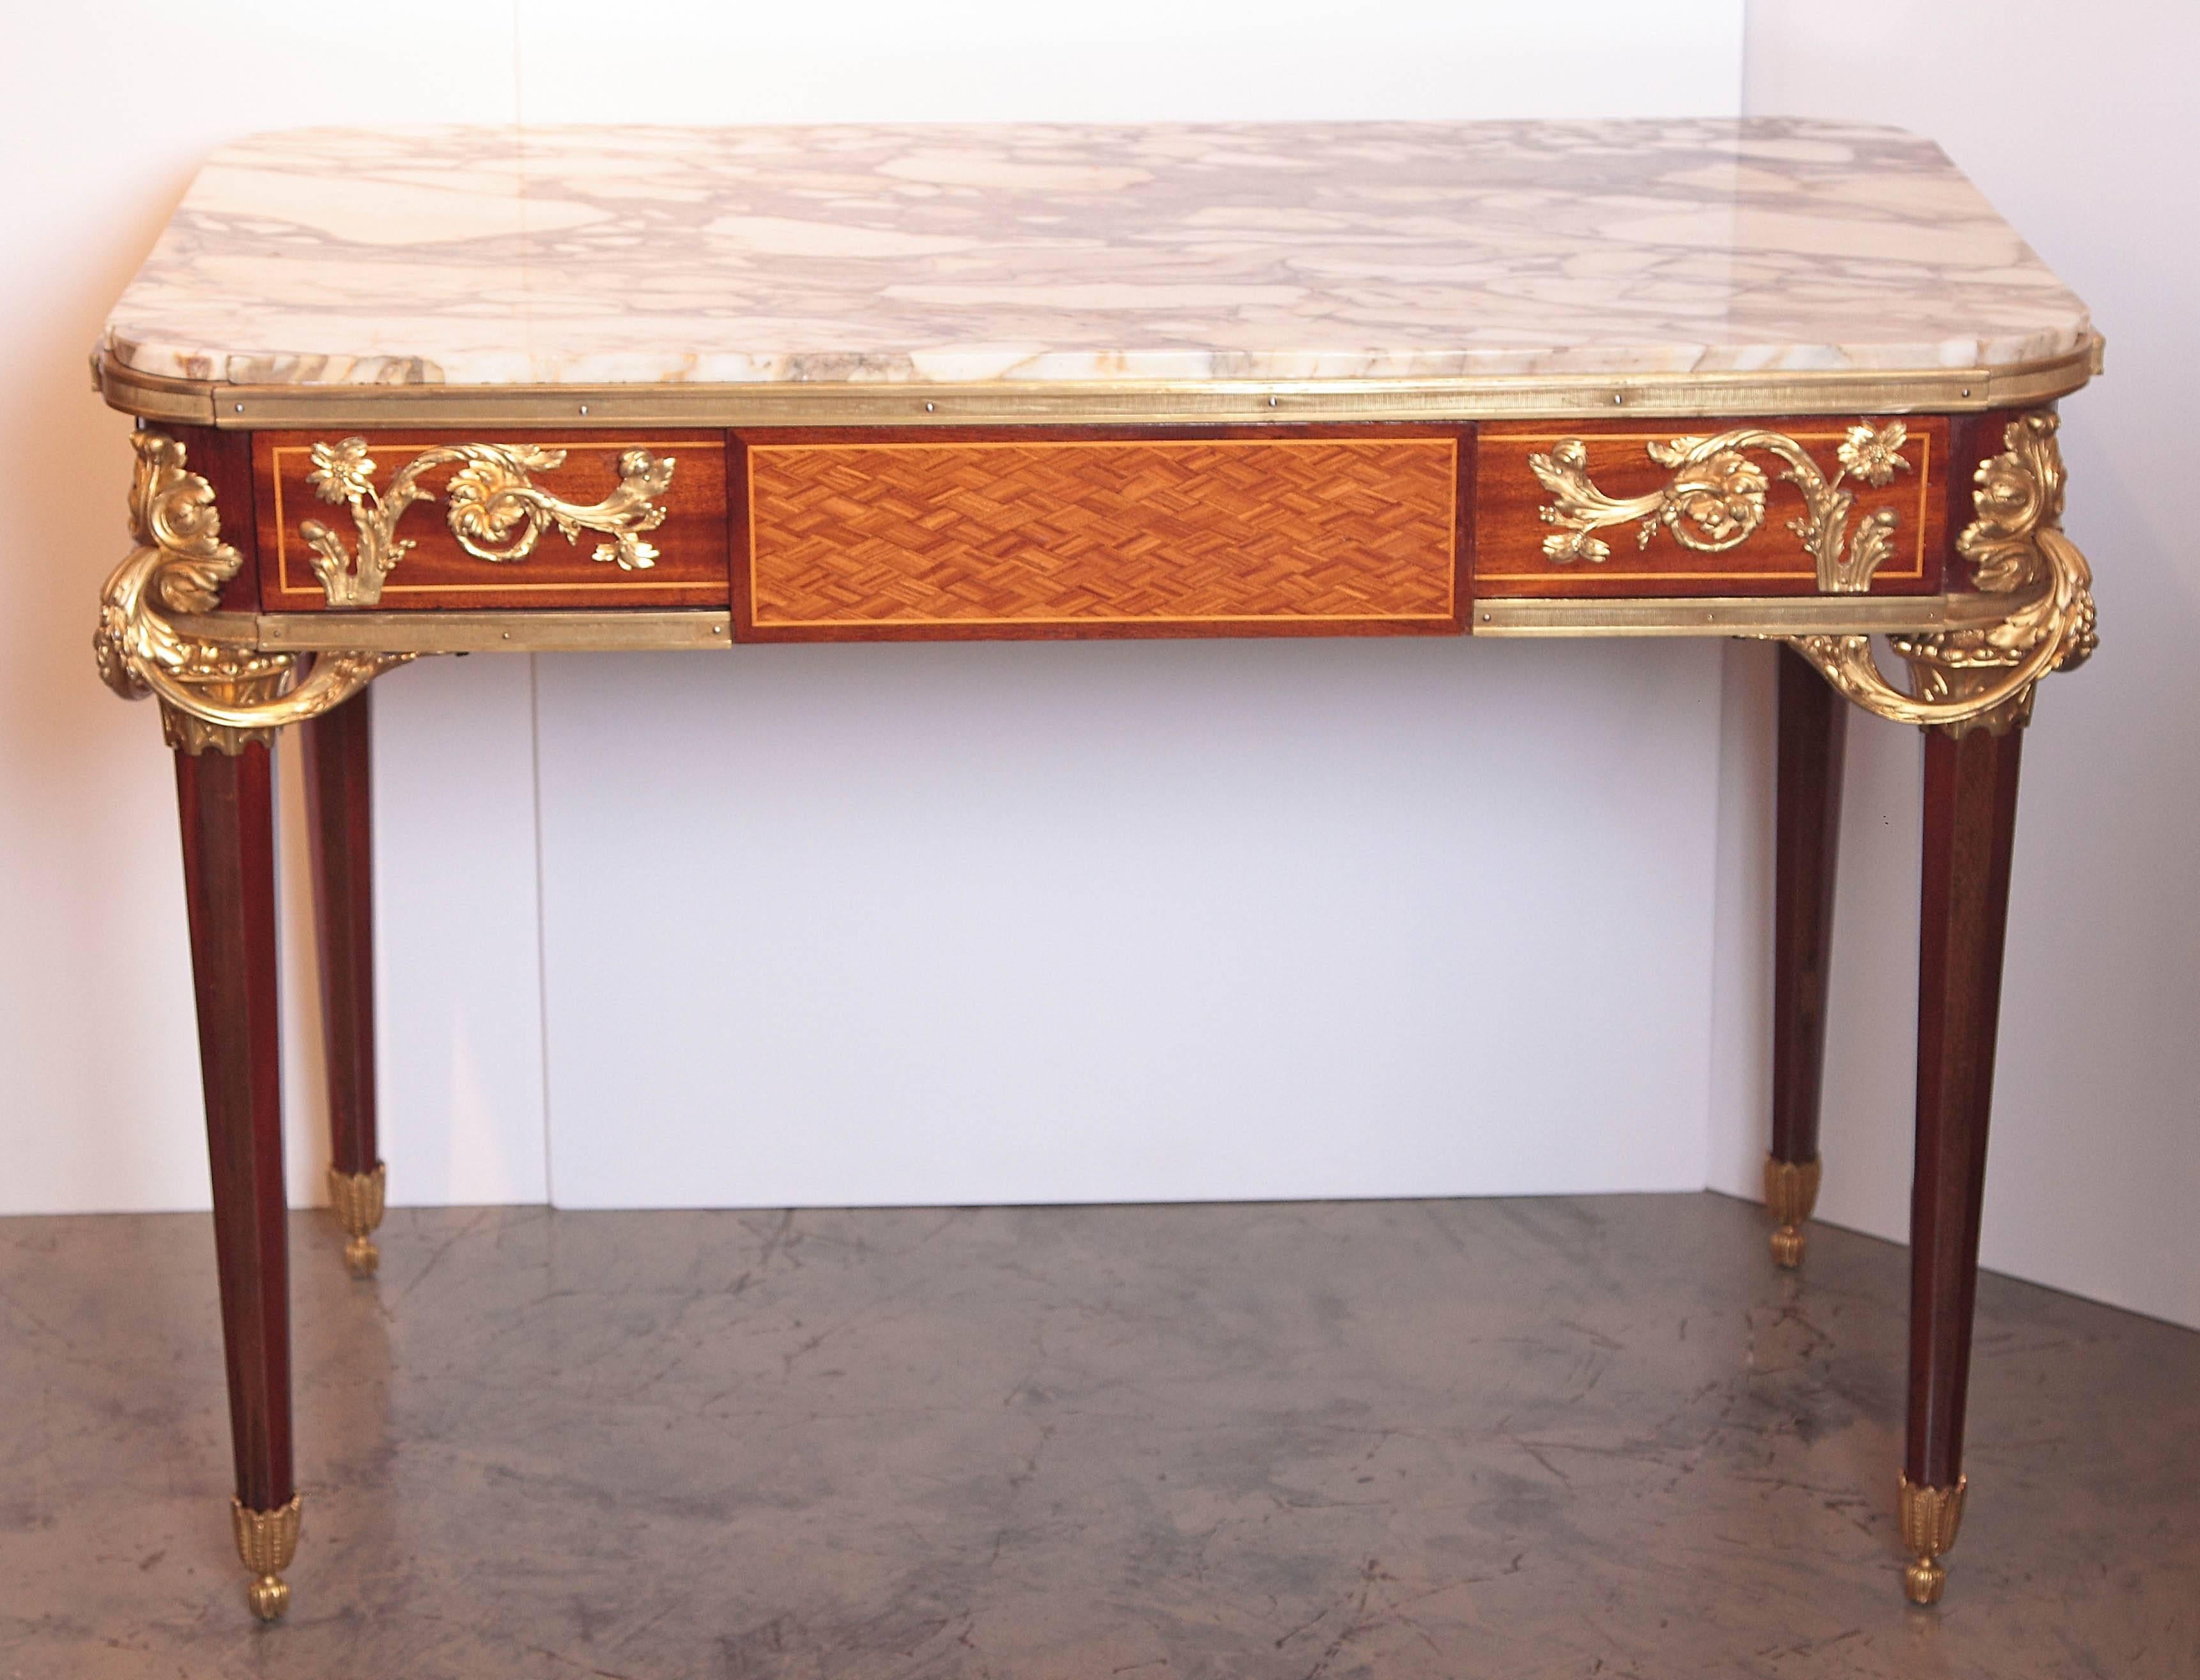 19th century French Louis XVI parquetry and gilt bronze console table with mechanical drawer. Breche Violette marble-top. 